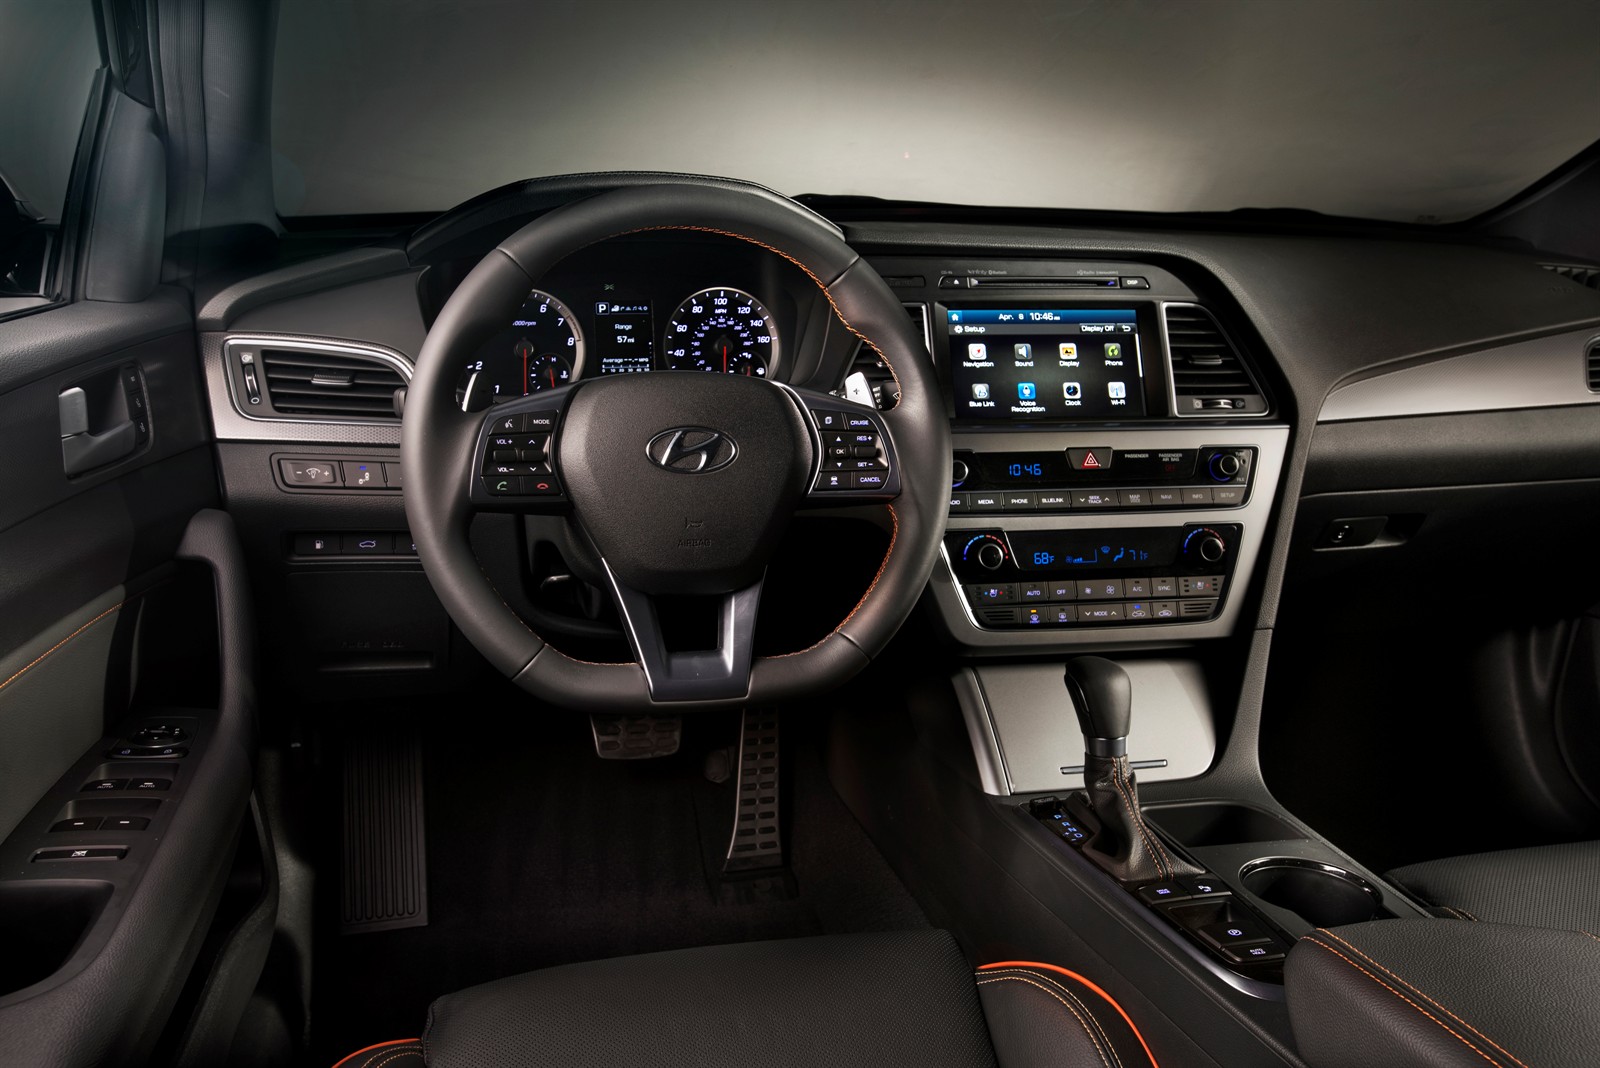 Android Auto Debuts in 2015 MY Hyundai Vehicles at Google’s Annual Developers Conference